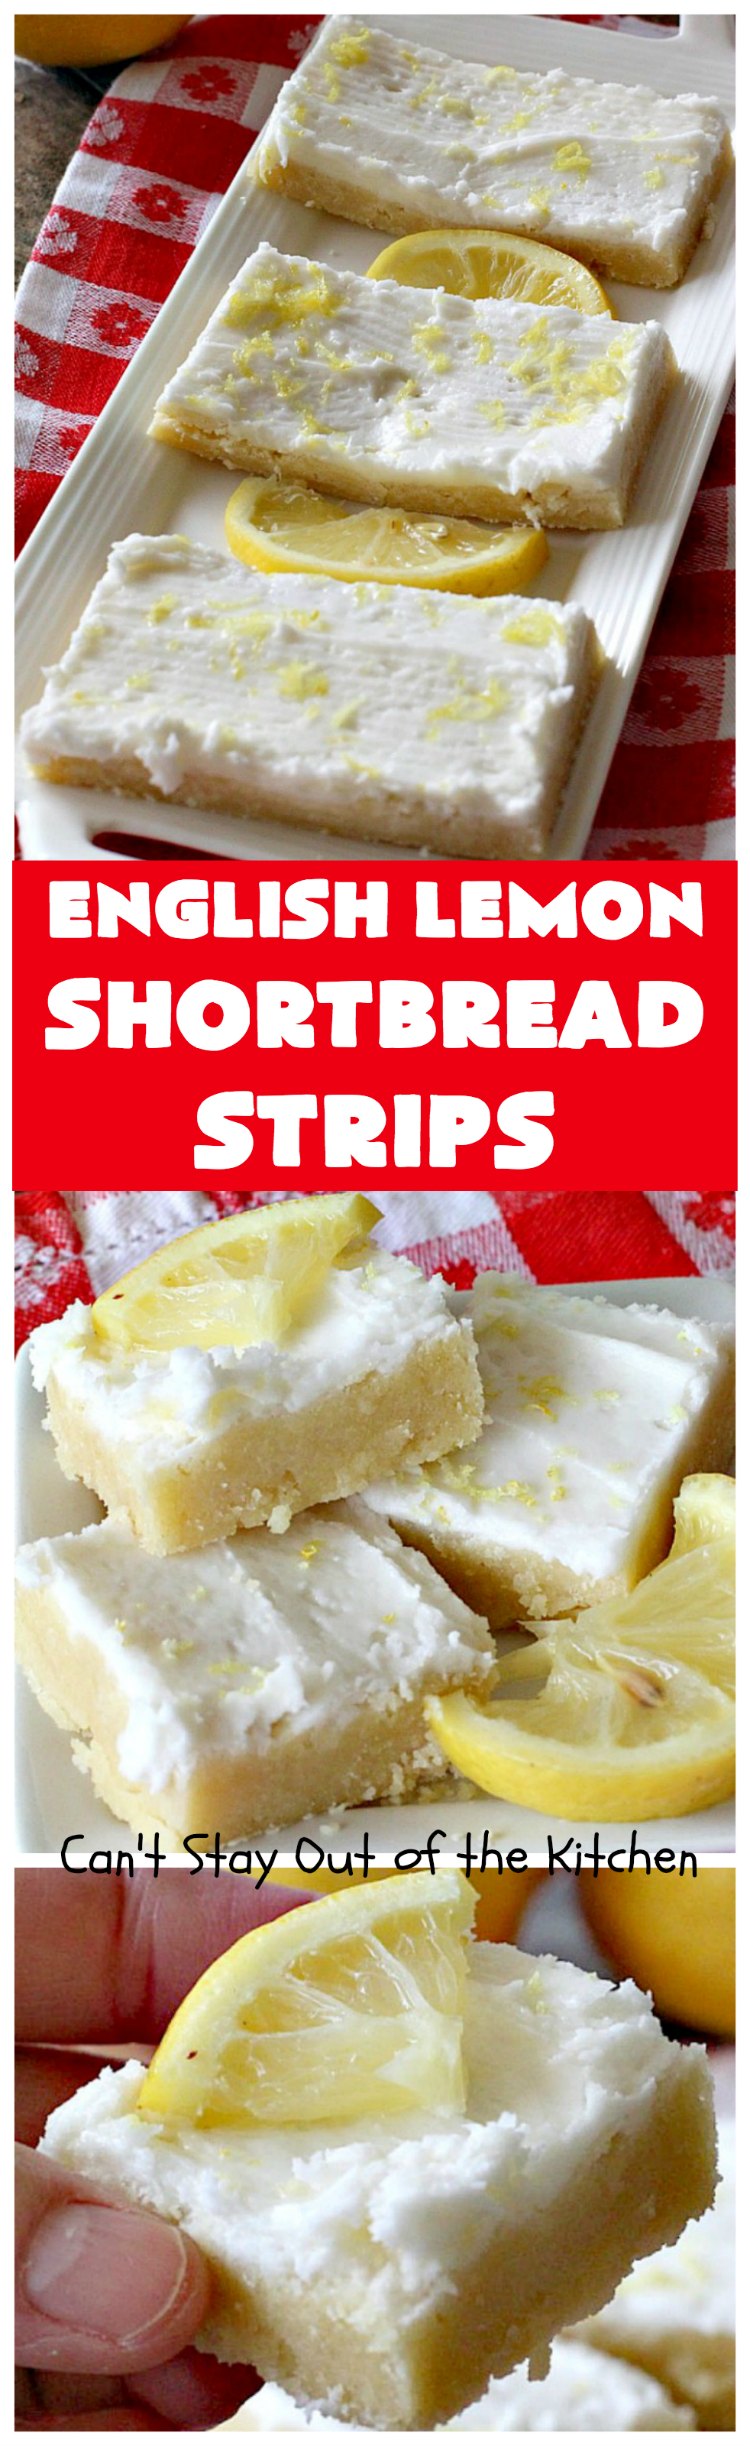 English Lemon Shortbread Strips | Can't Stay Out of the Kitchen